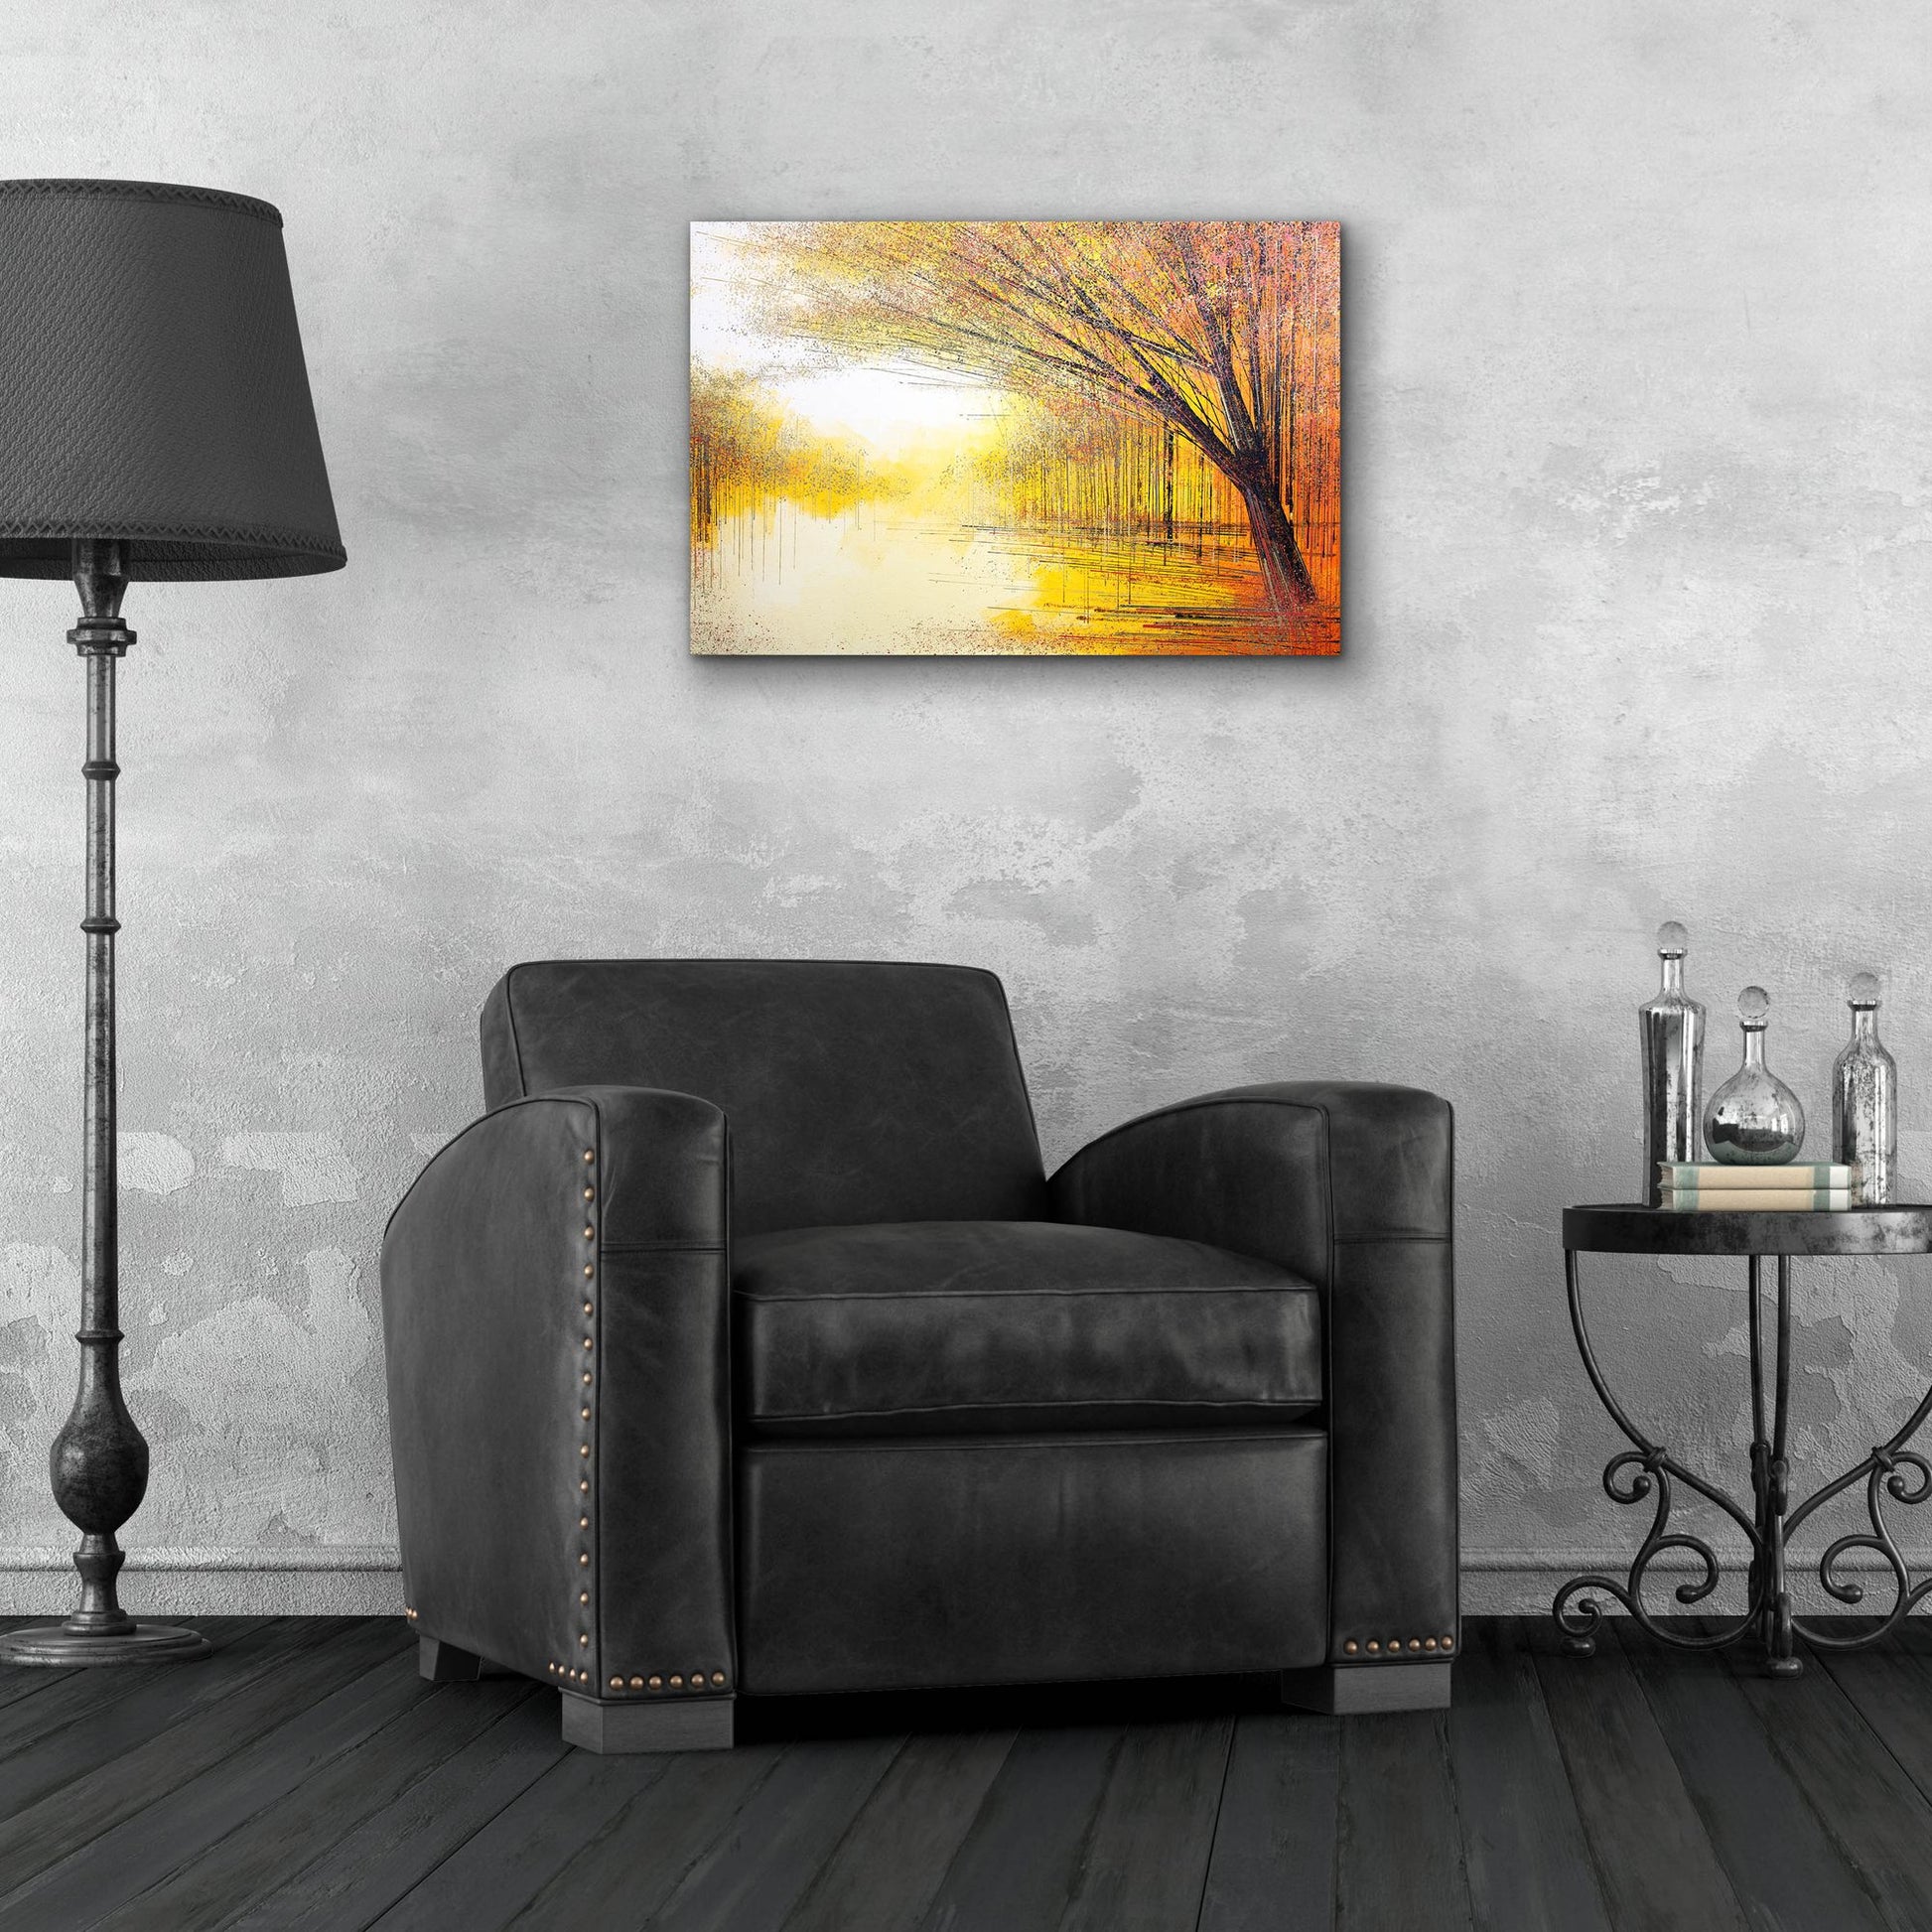 Epic Art 'Trees In A Golden Glow' by Marc Todd, Acrylic Glass Wall Art,24x16